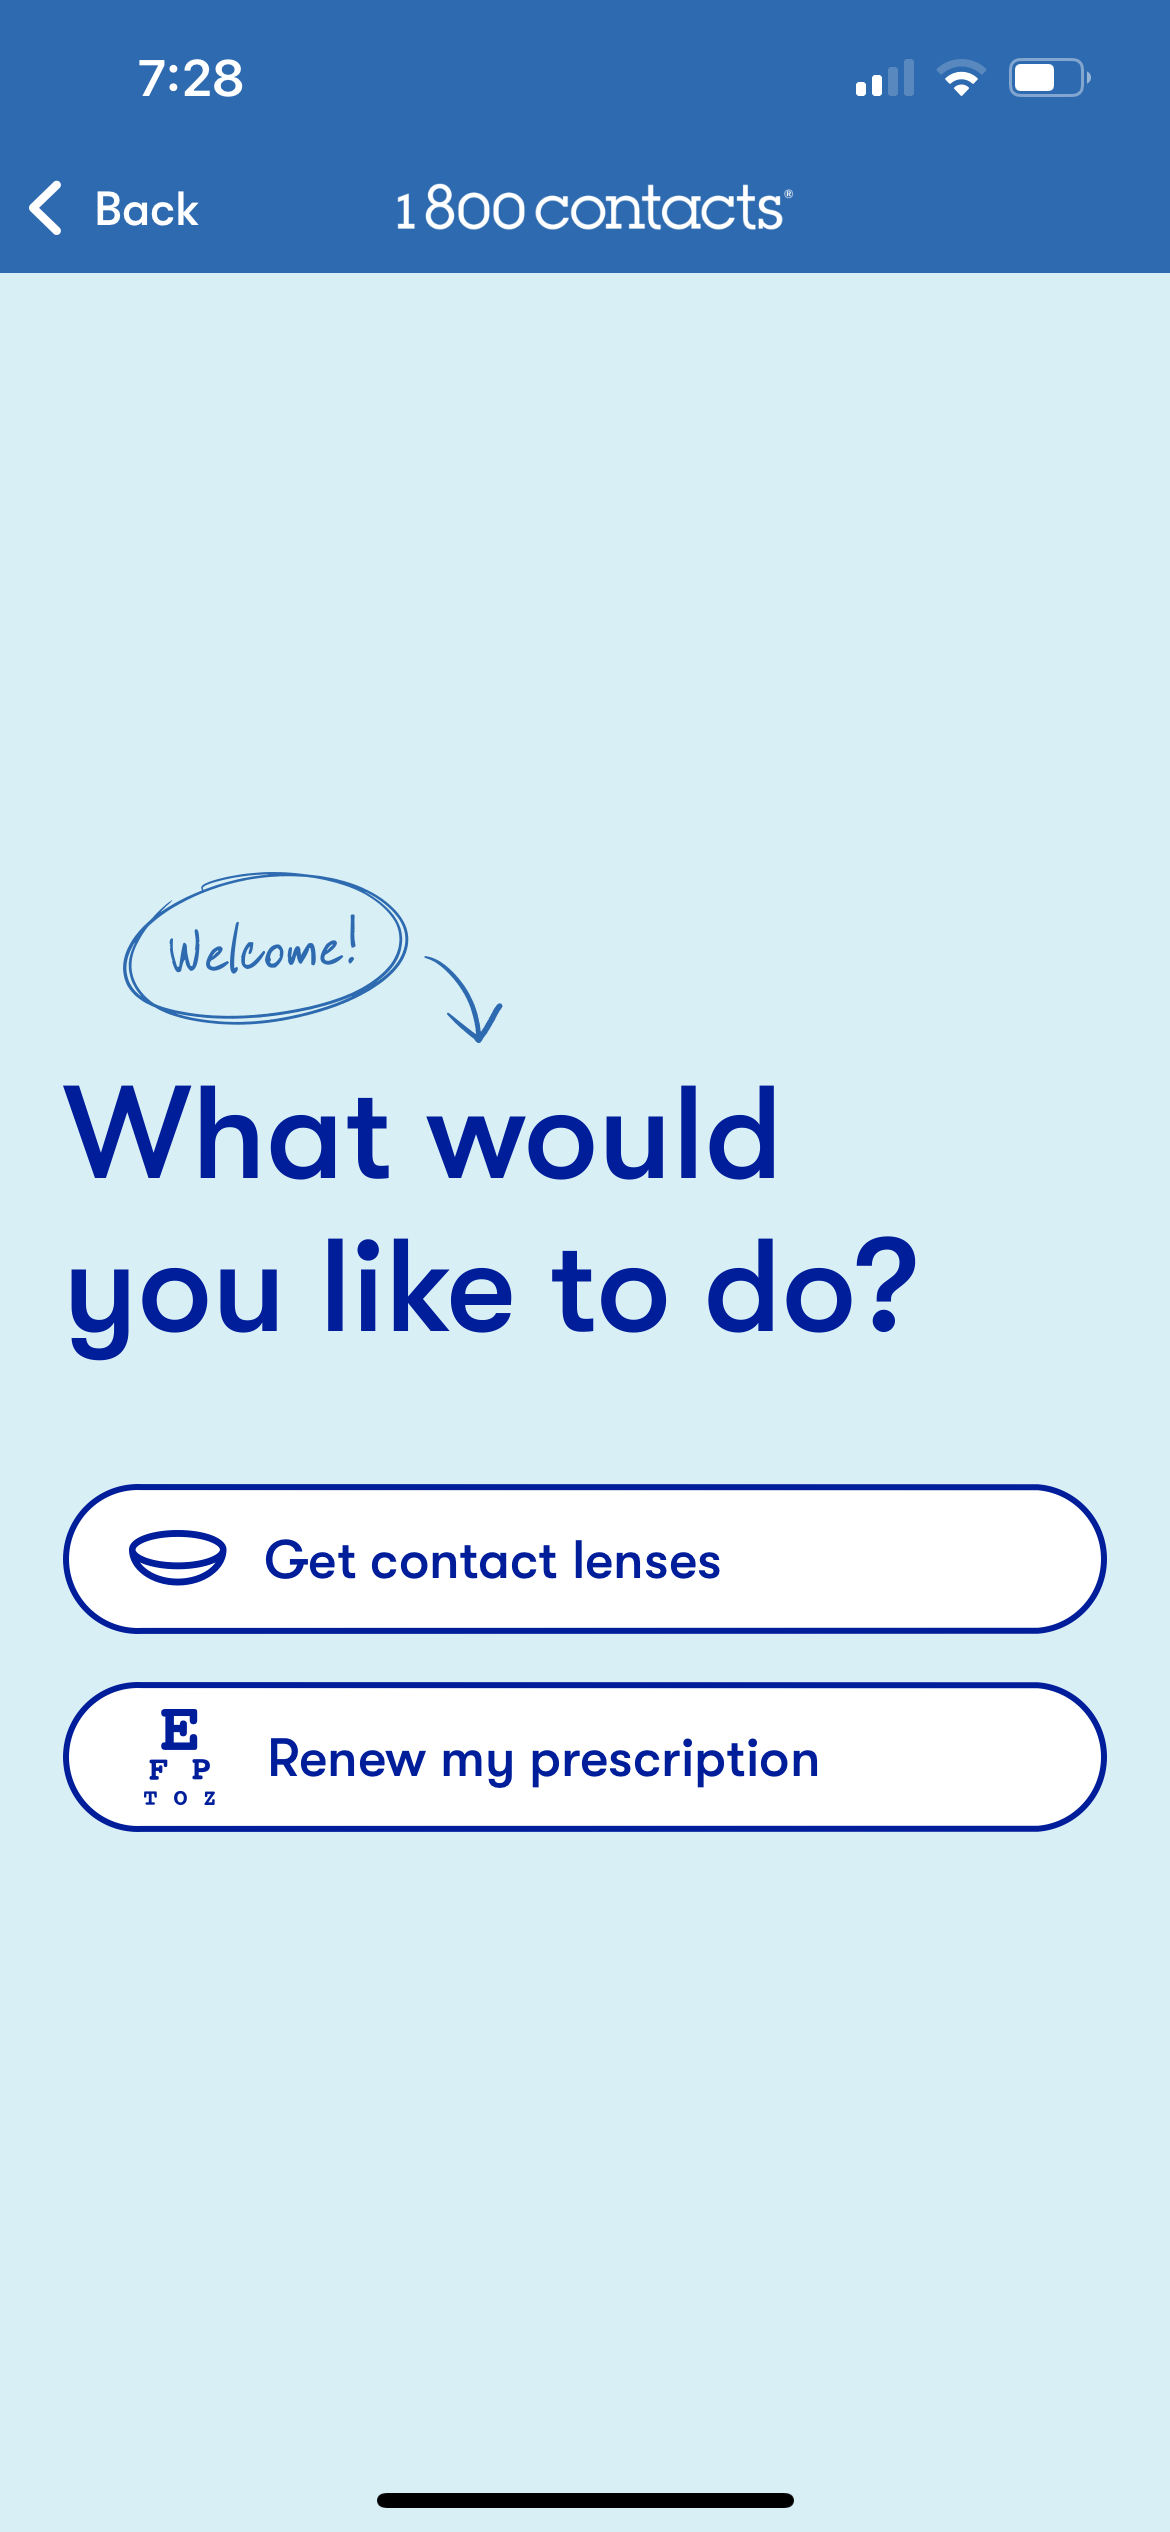 1800 contacts app start page